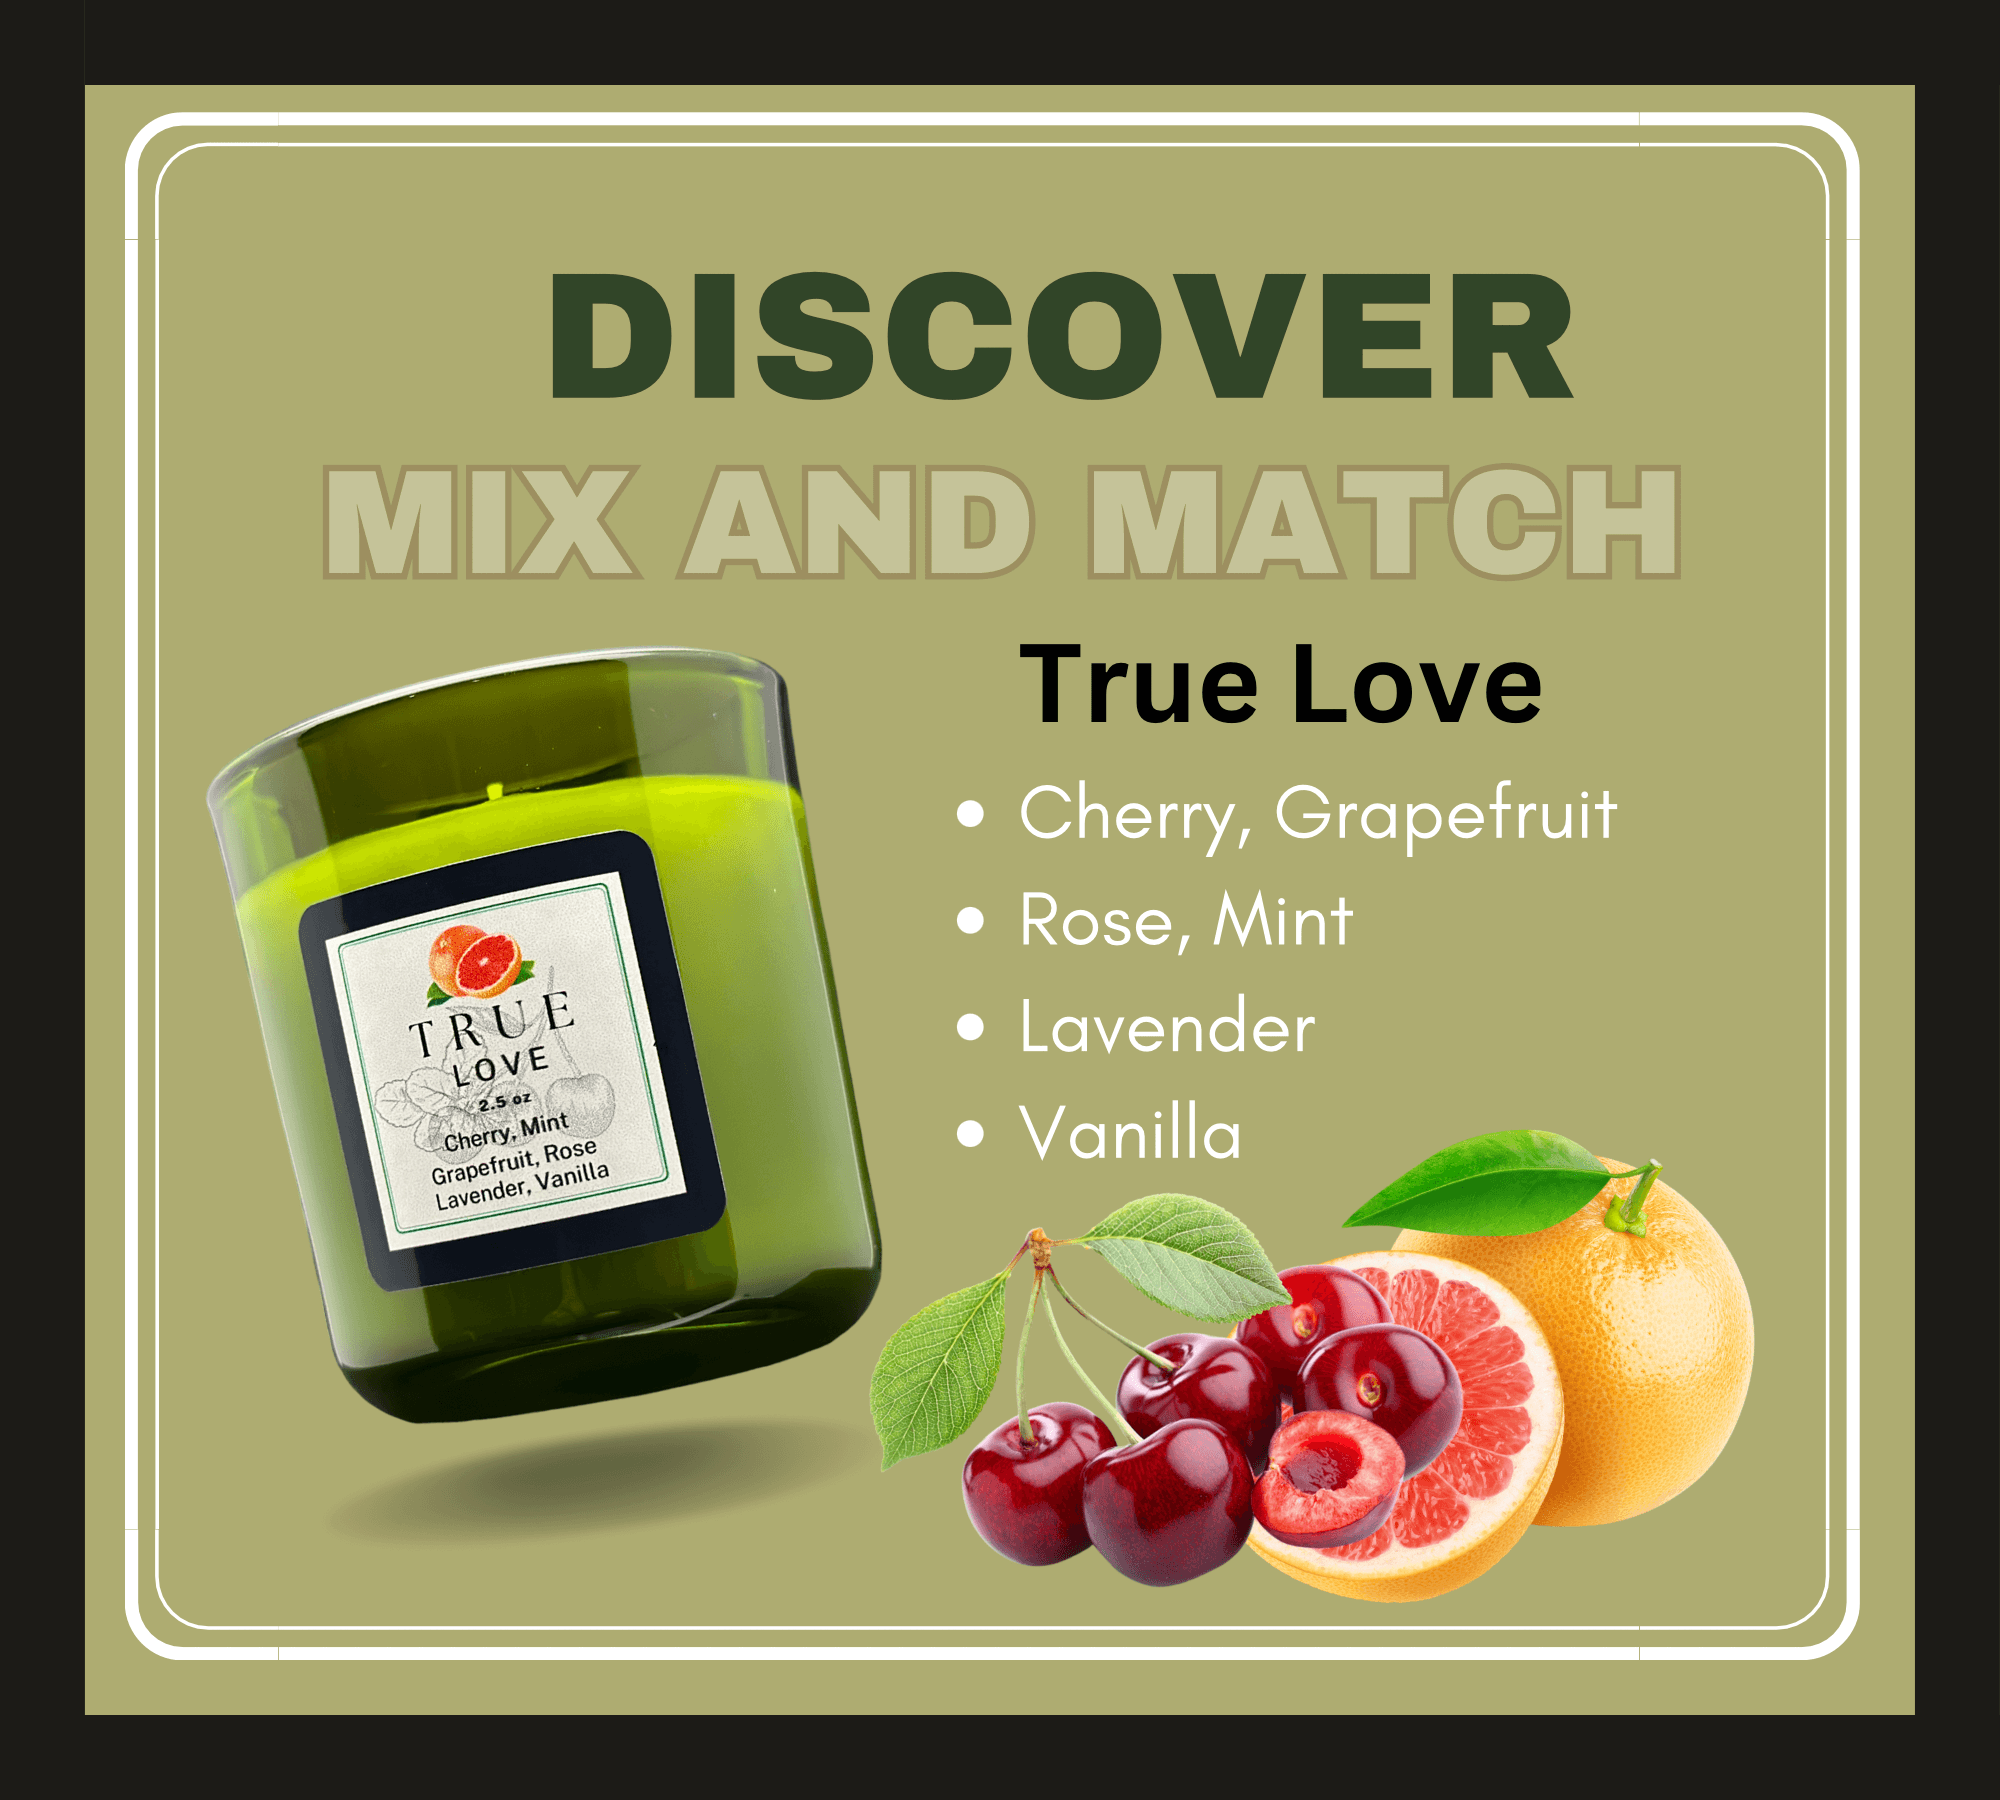 True love candle. Grapefruit, mint and vanilla. Fragrance discovery set.